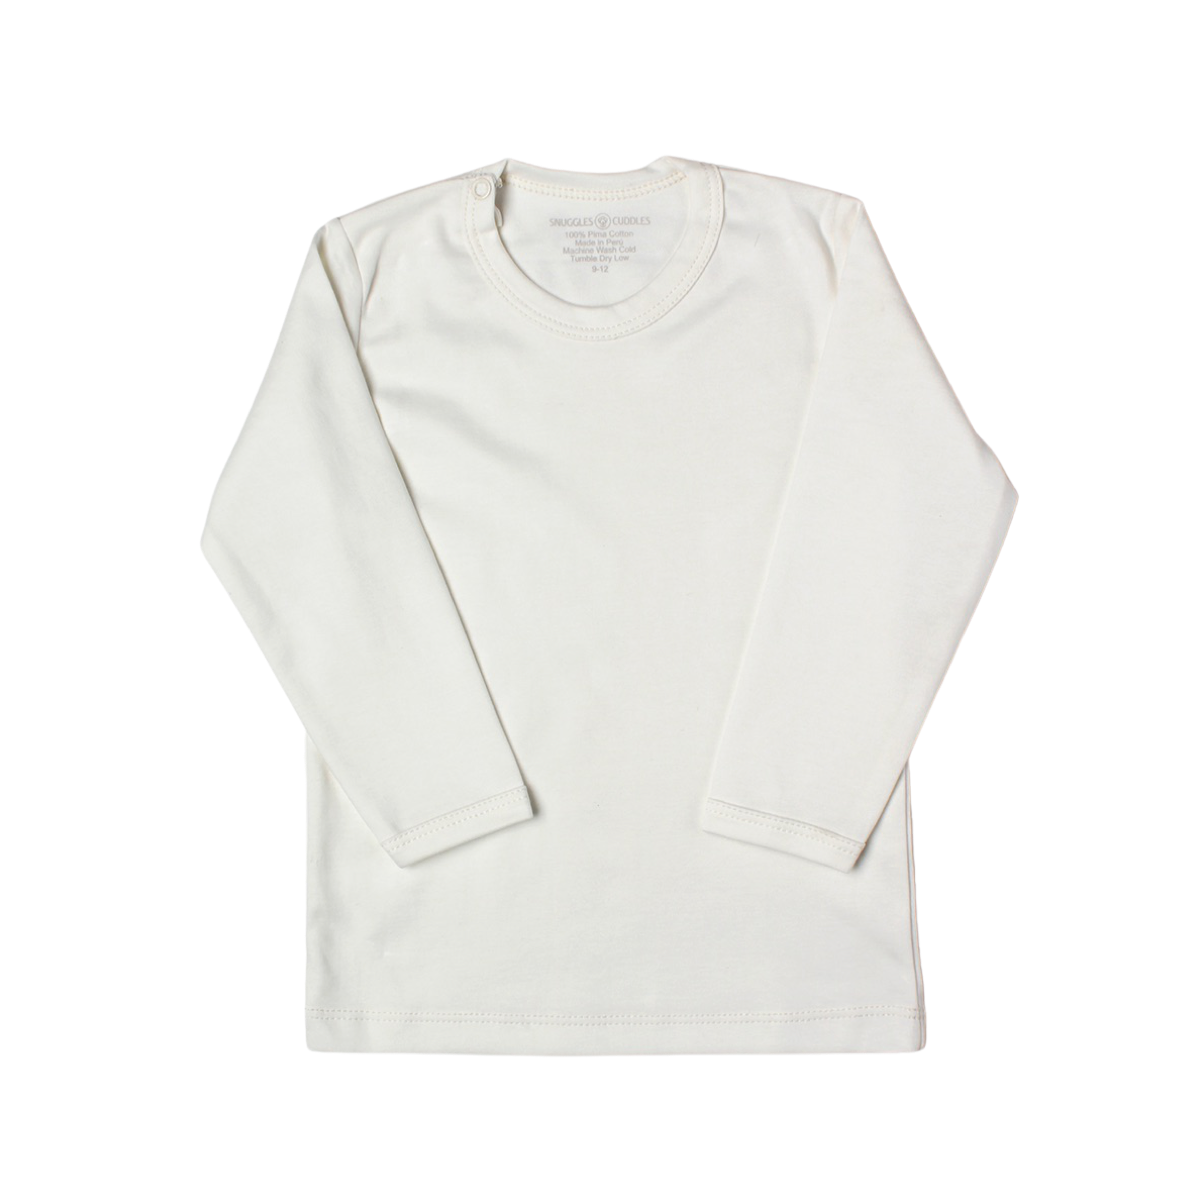 Off White - Classic Long Sleeve Shirt in Pima Cotton